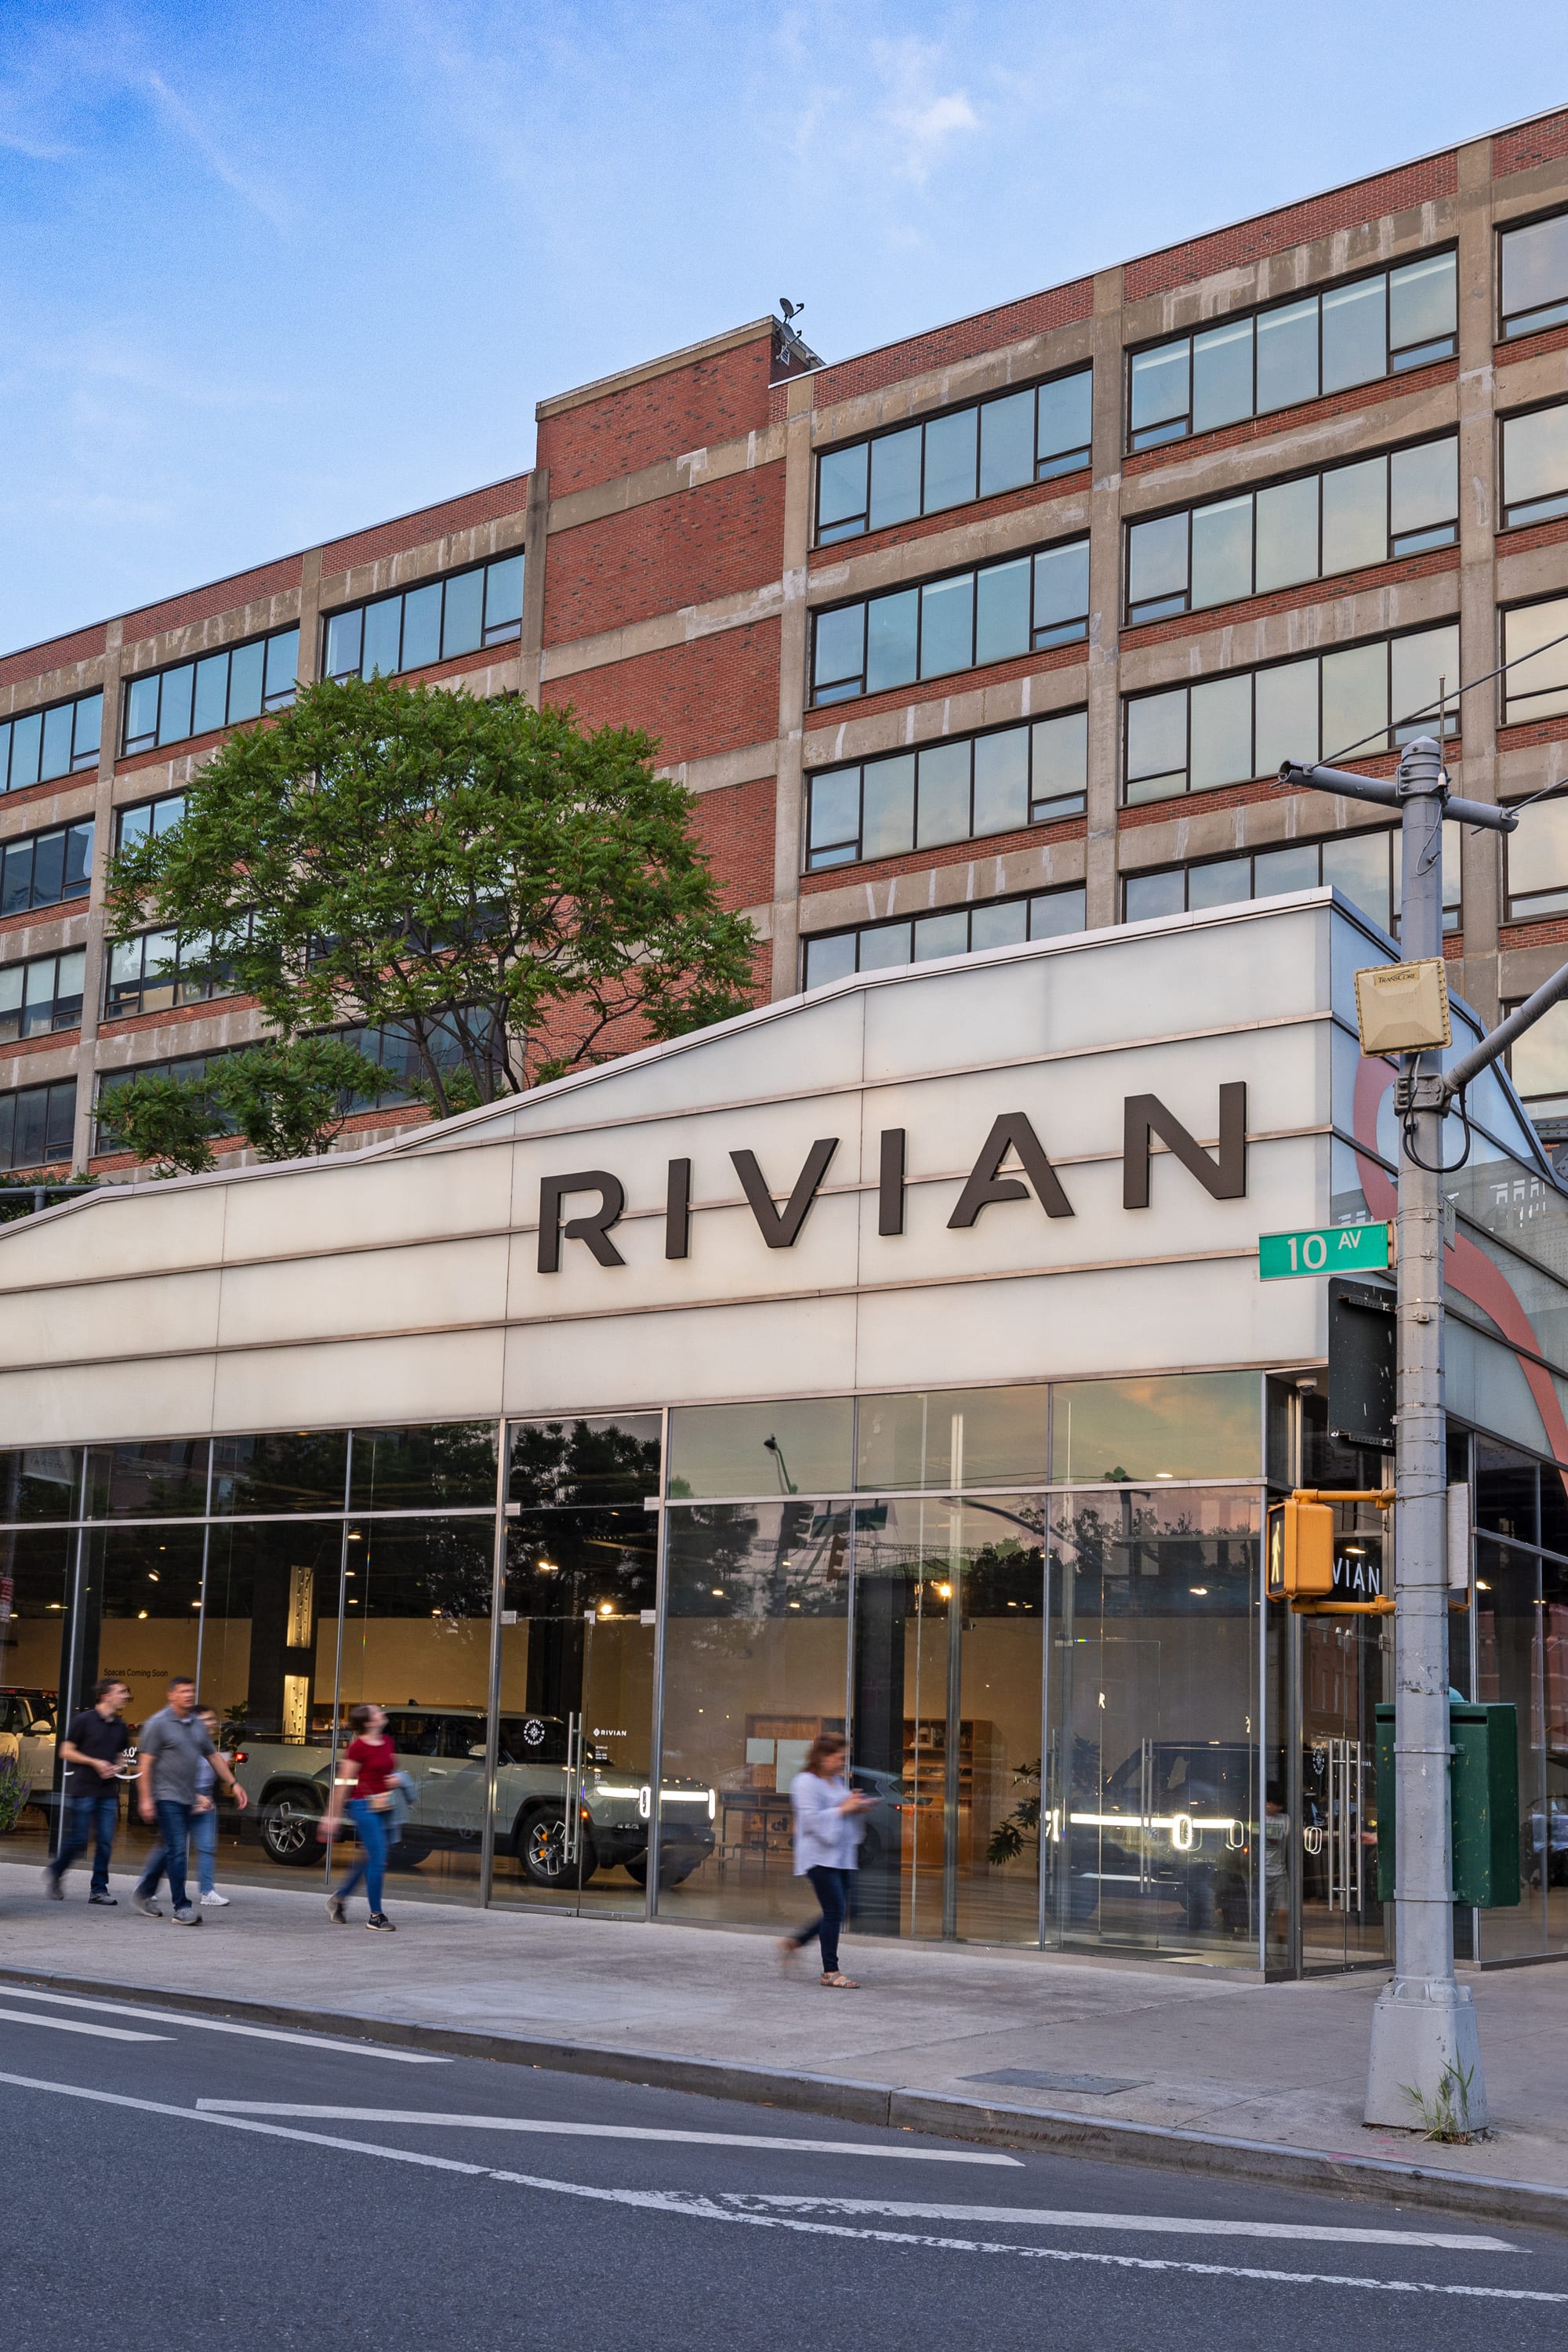 Rivian Launches ‘Spaces’ to Bring a New Automotive Retail Experience to Cities Across North America